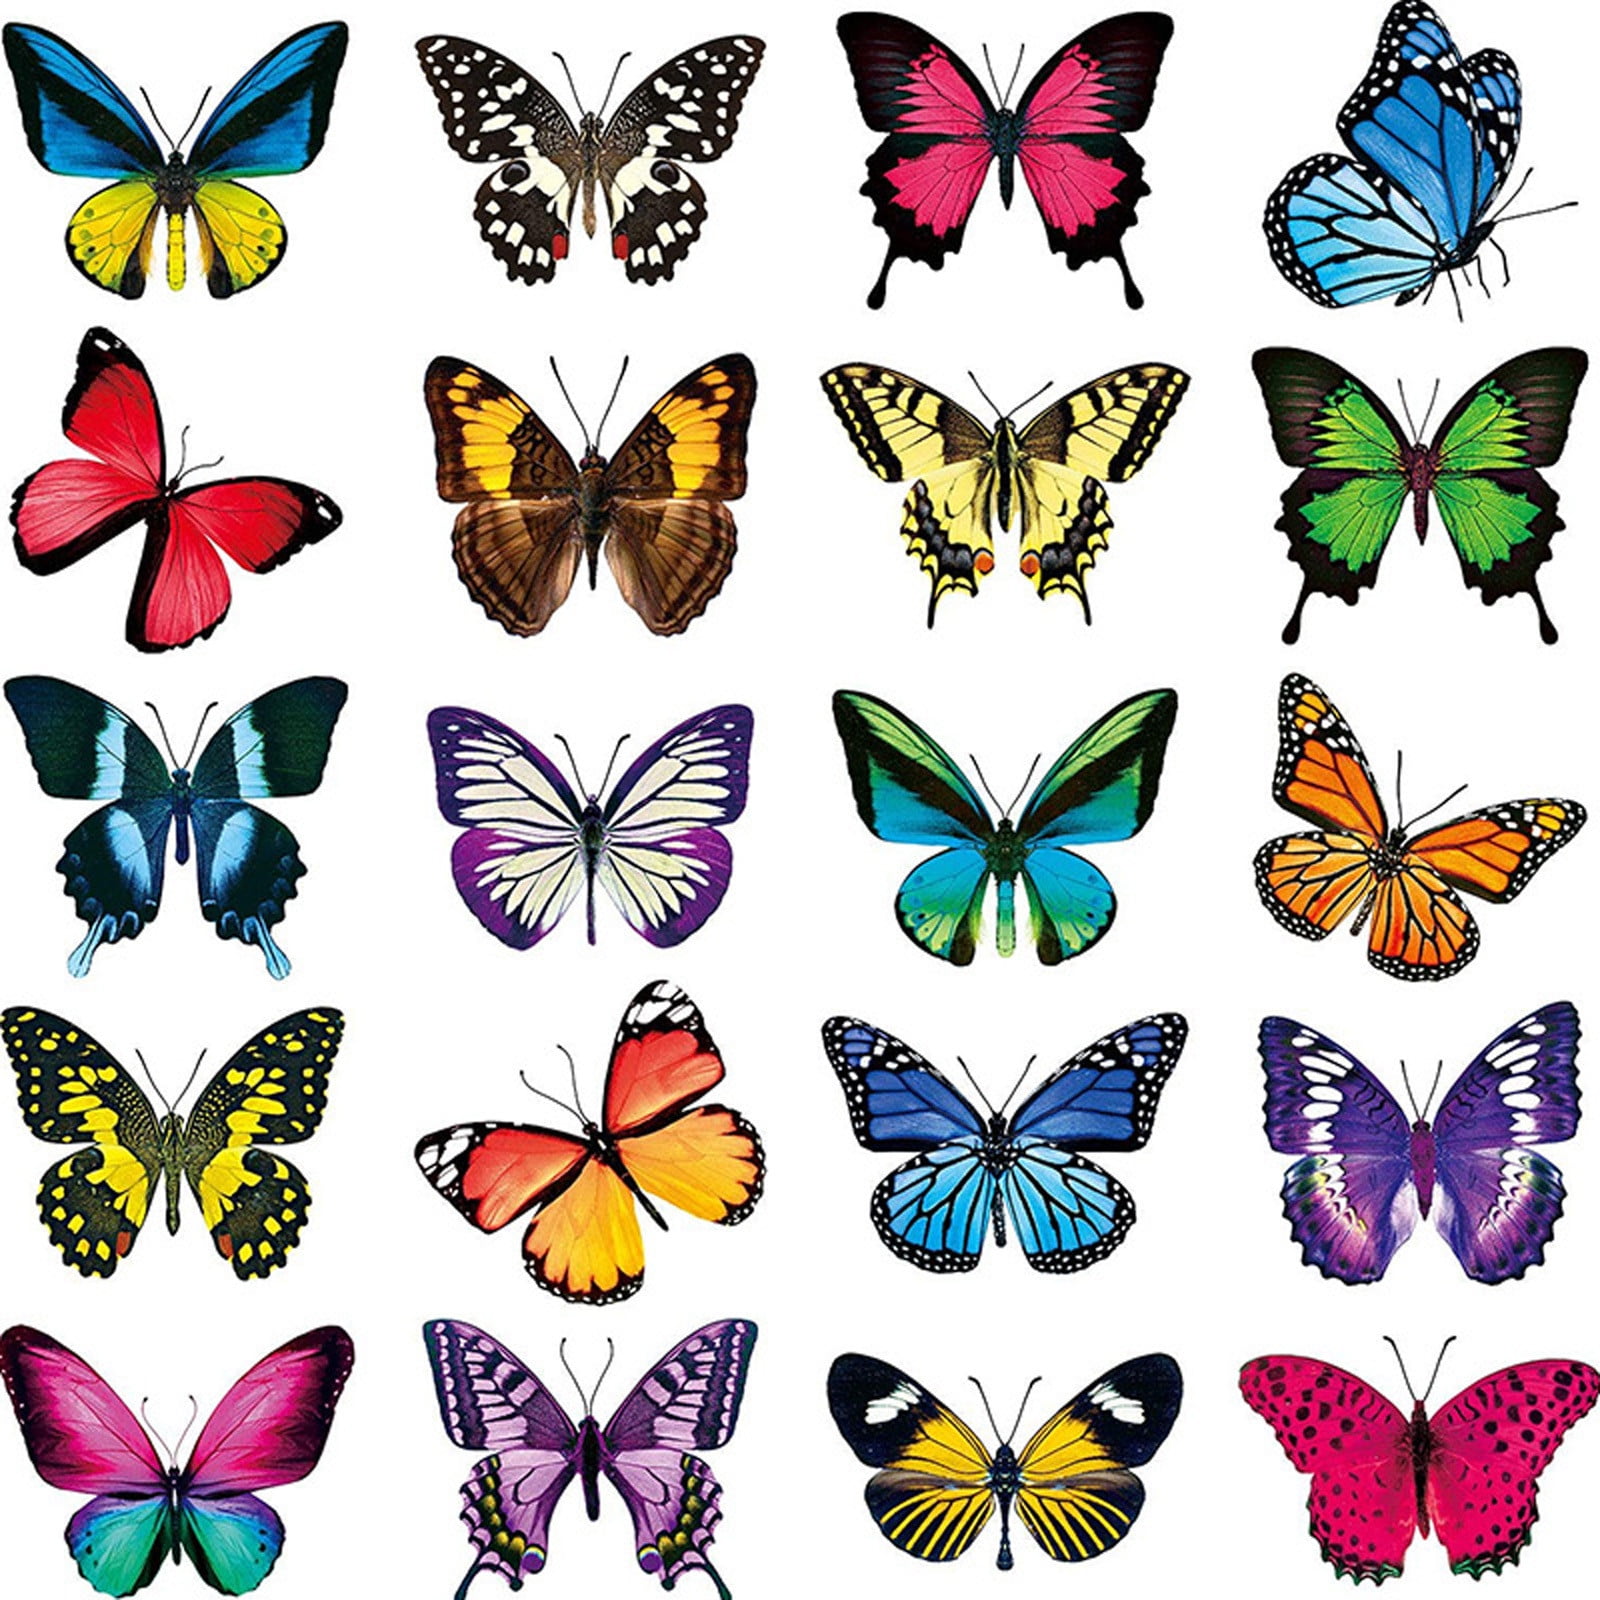 Girl with Beautiful Butterfly Paint Colourful Vinyl Sticker Decal 100mm High 